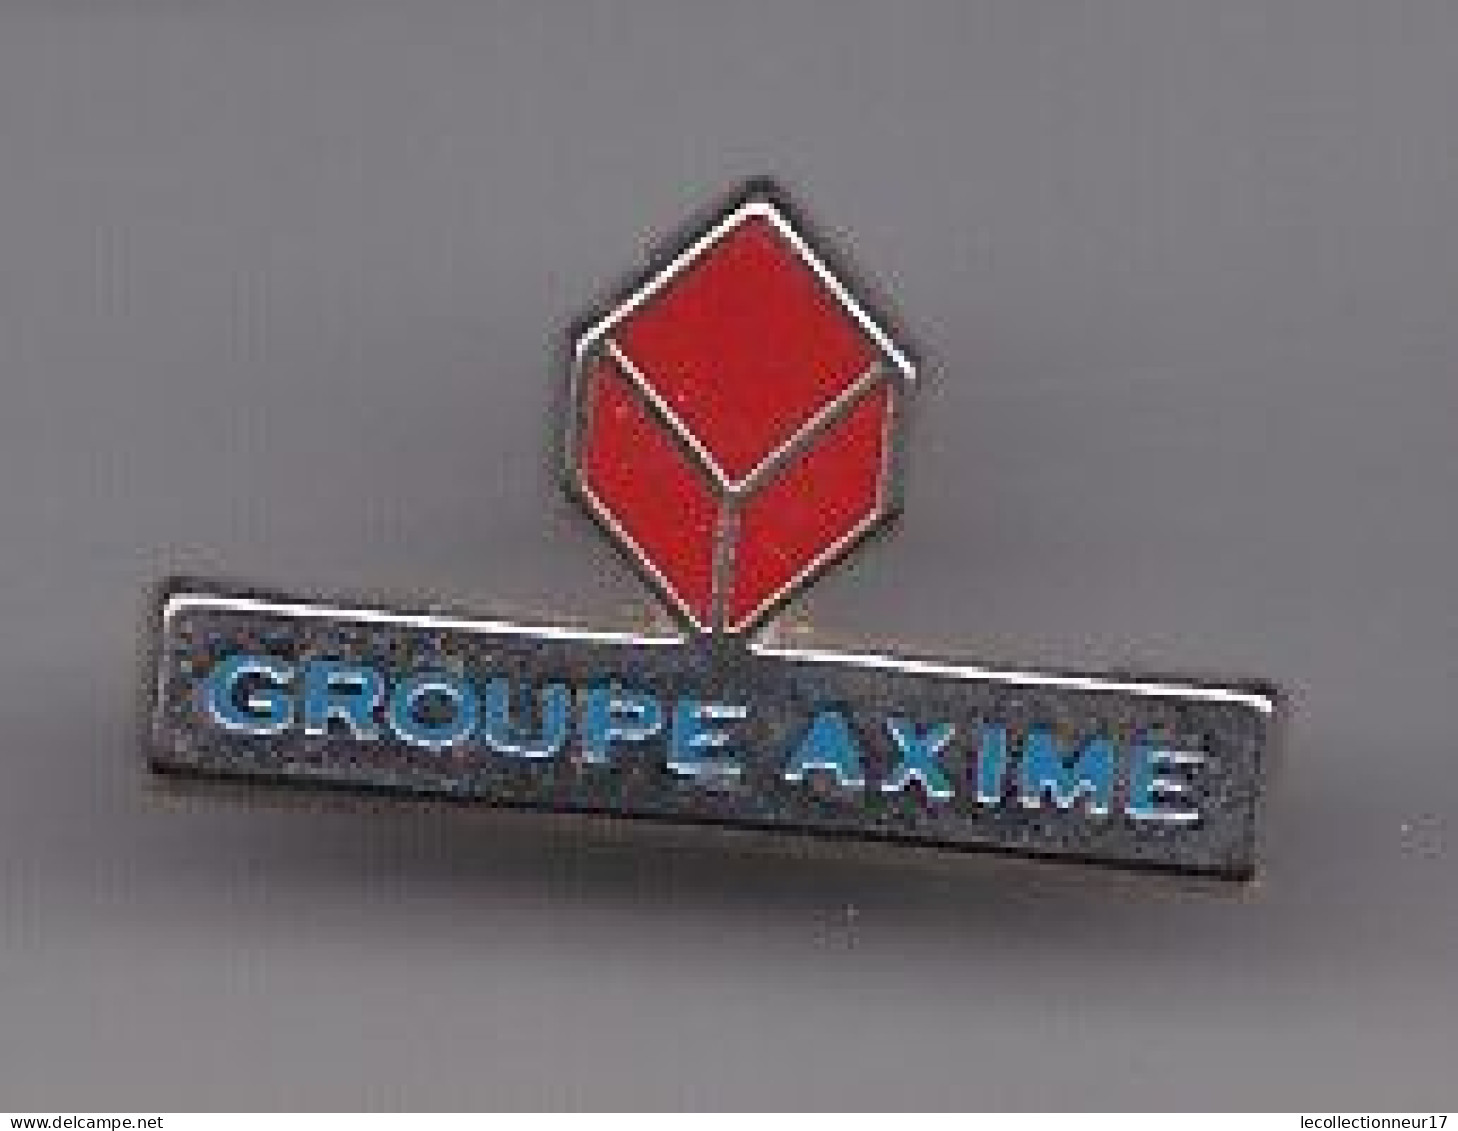 Pin's Groupe Axime Informatique Réf 4580 - Computers